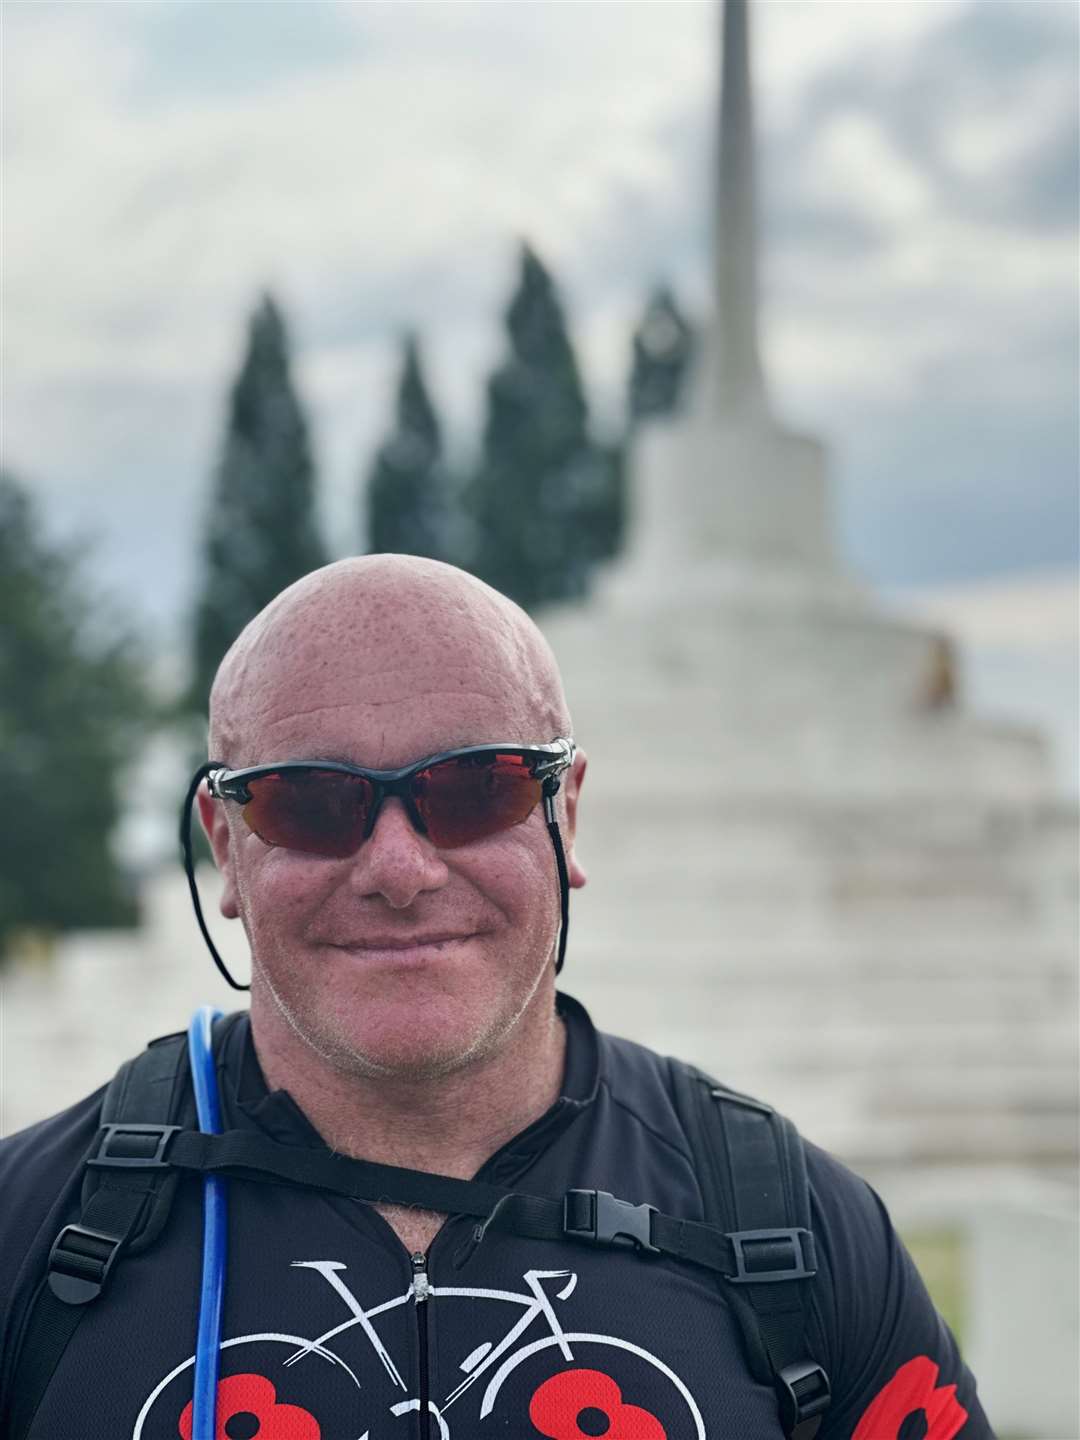 Kev Stewart felt 'pride and gratitude' at seeing the war sites during his 300km cycling trip.